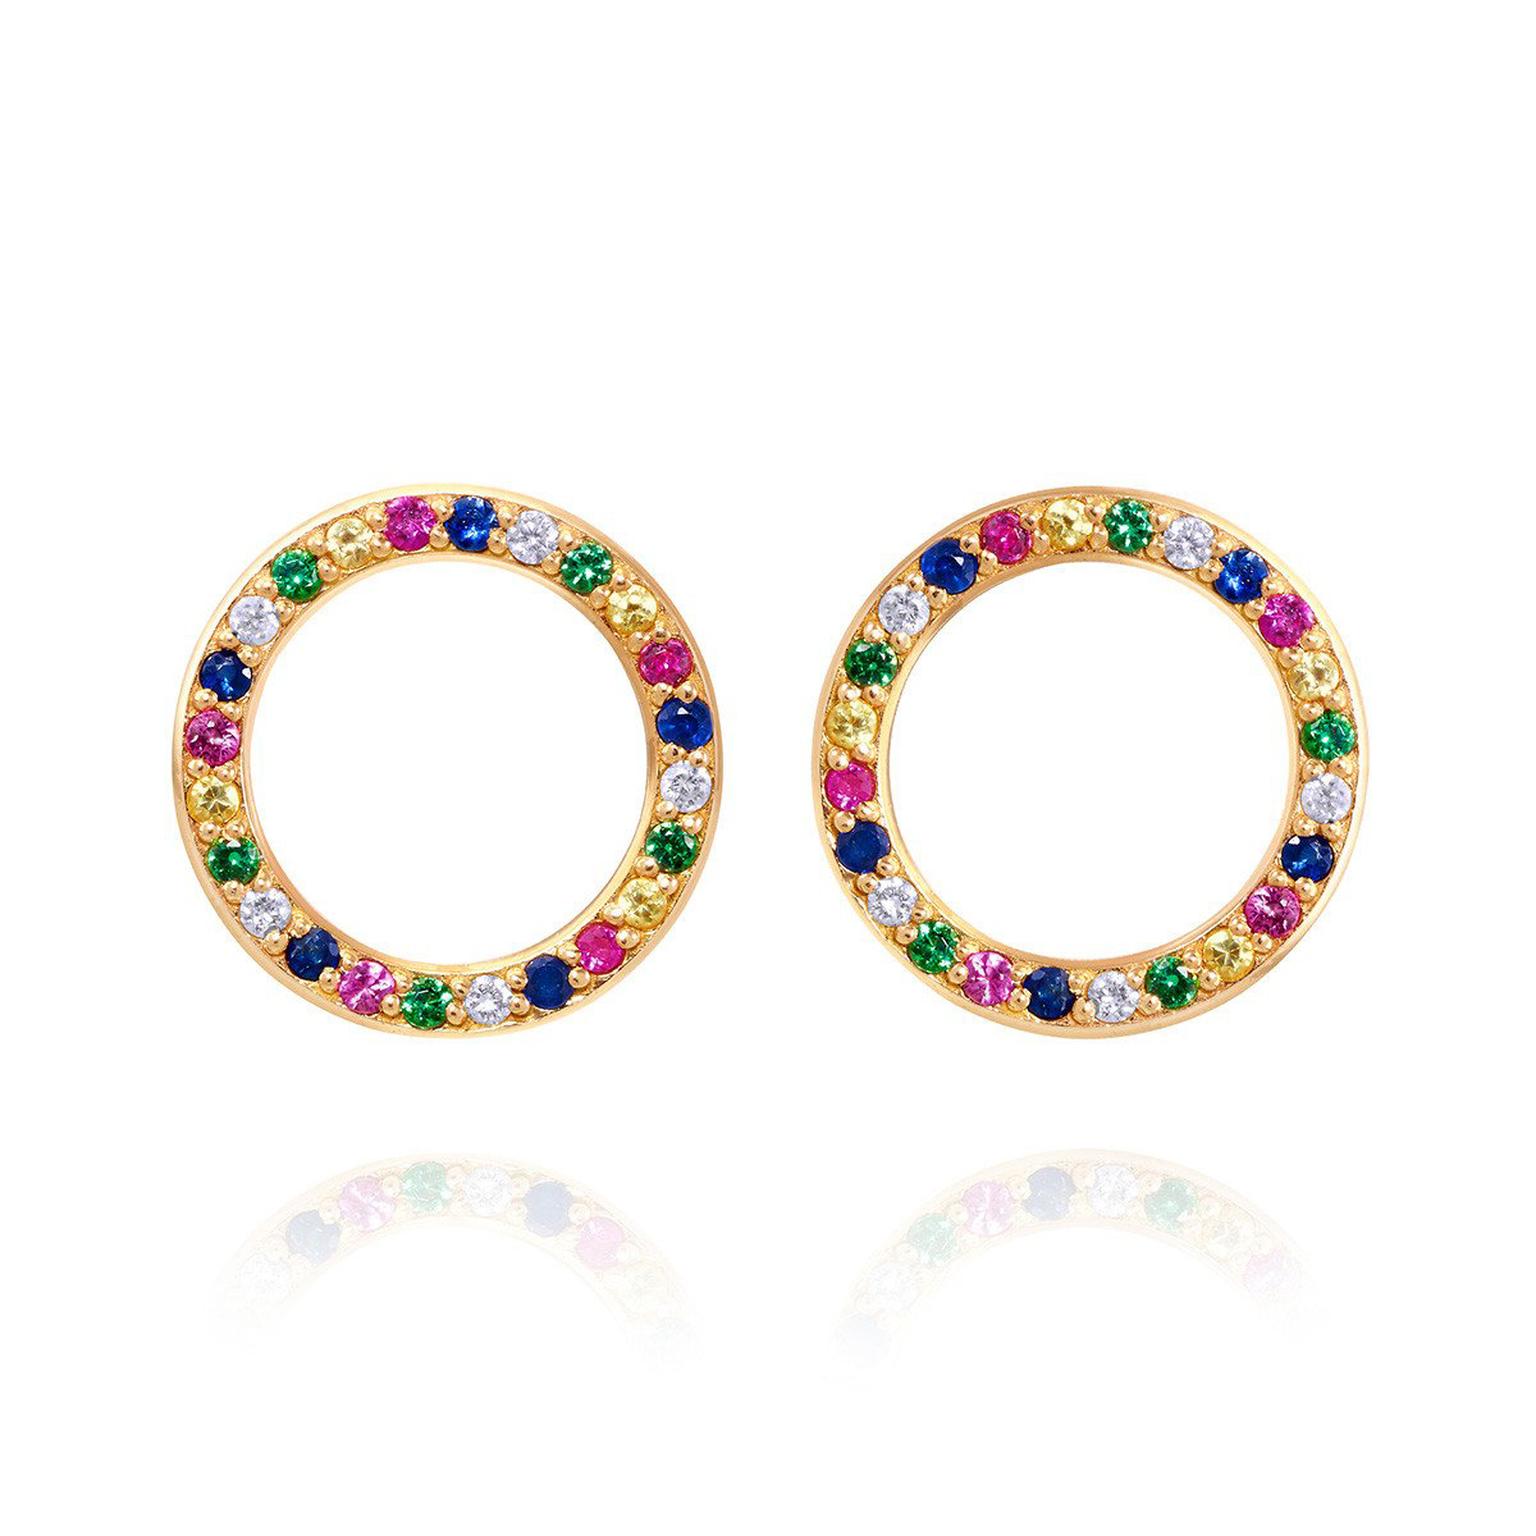 Sabine Getty Baby Memphis studs with multi-coloured gemstones